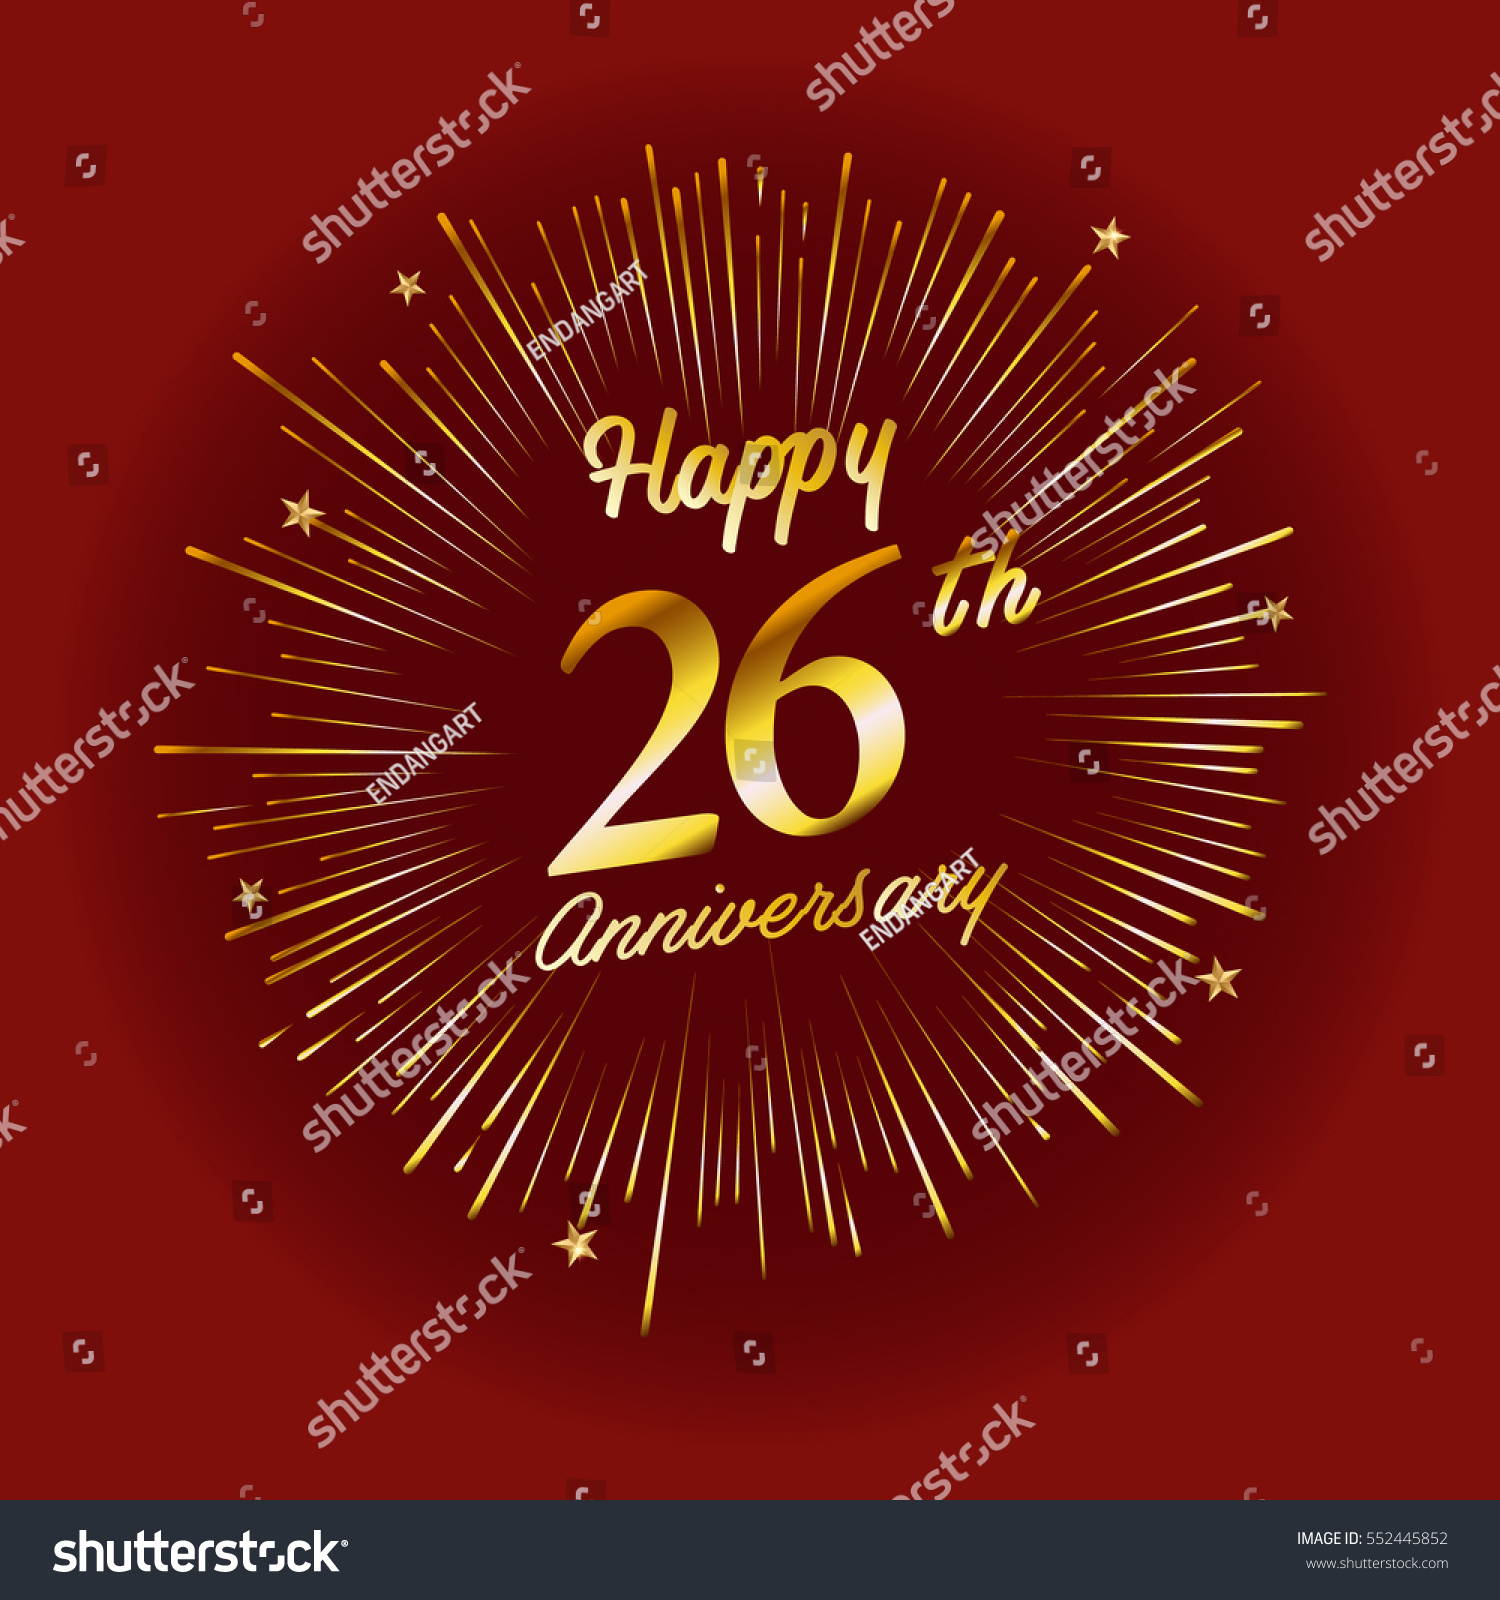 happy-26th-anniversary-fireworks-star-on-stock-vector-552445852